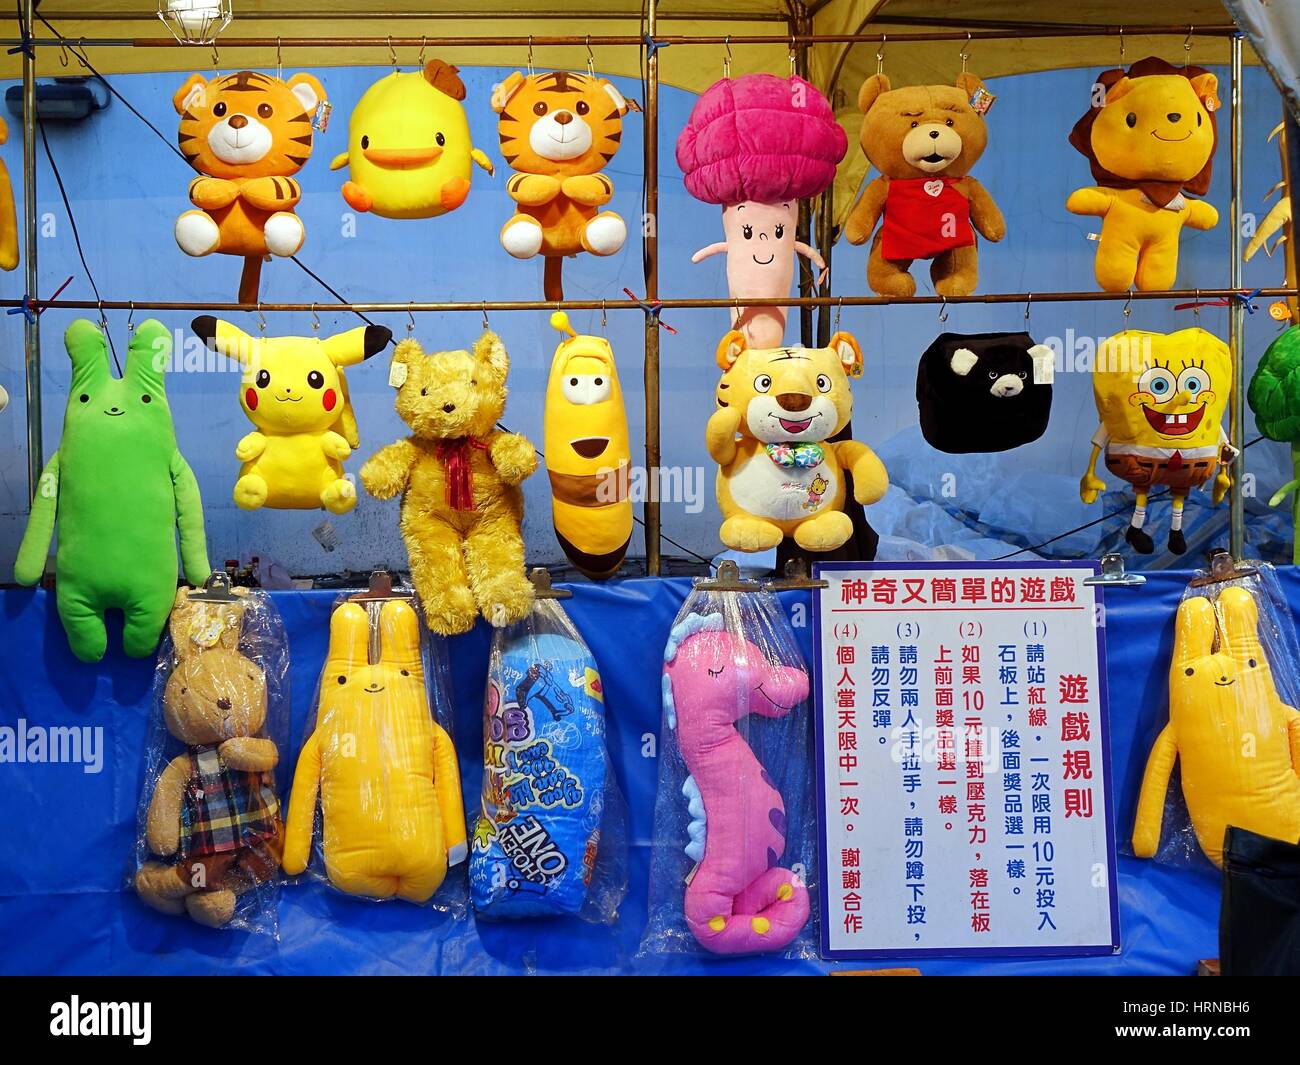 KAOHSIUNG, TAIWAN -- FEBRUARY 13, 2016: Stuffed animals and toys are offered as prizes at a skill game during the 2016 Lantern Festival. Stock Photo